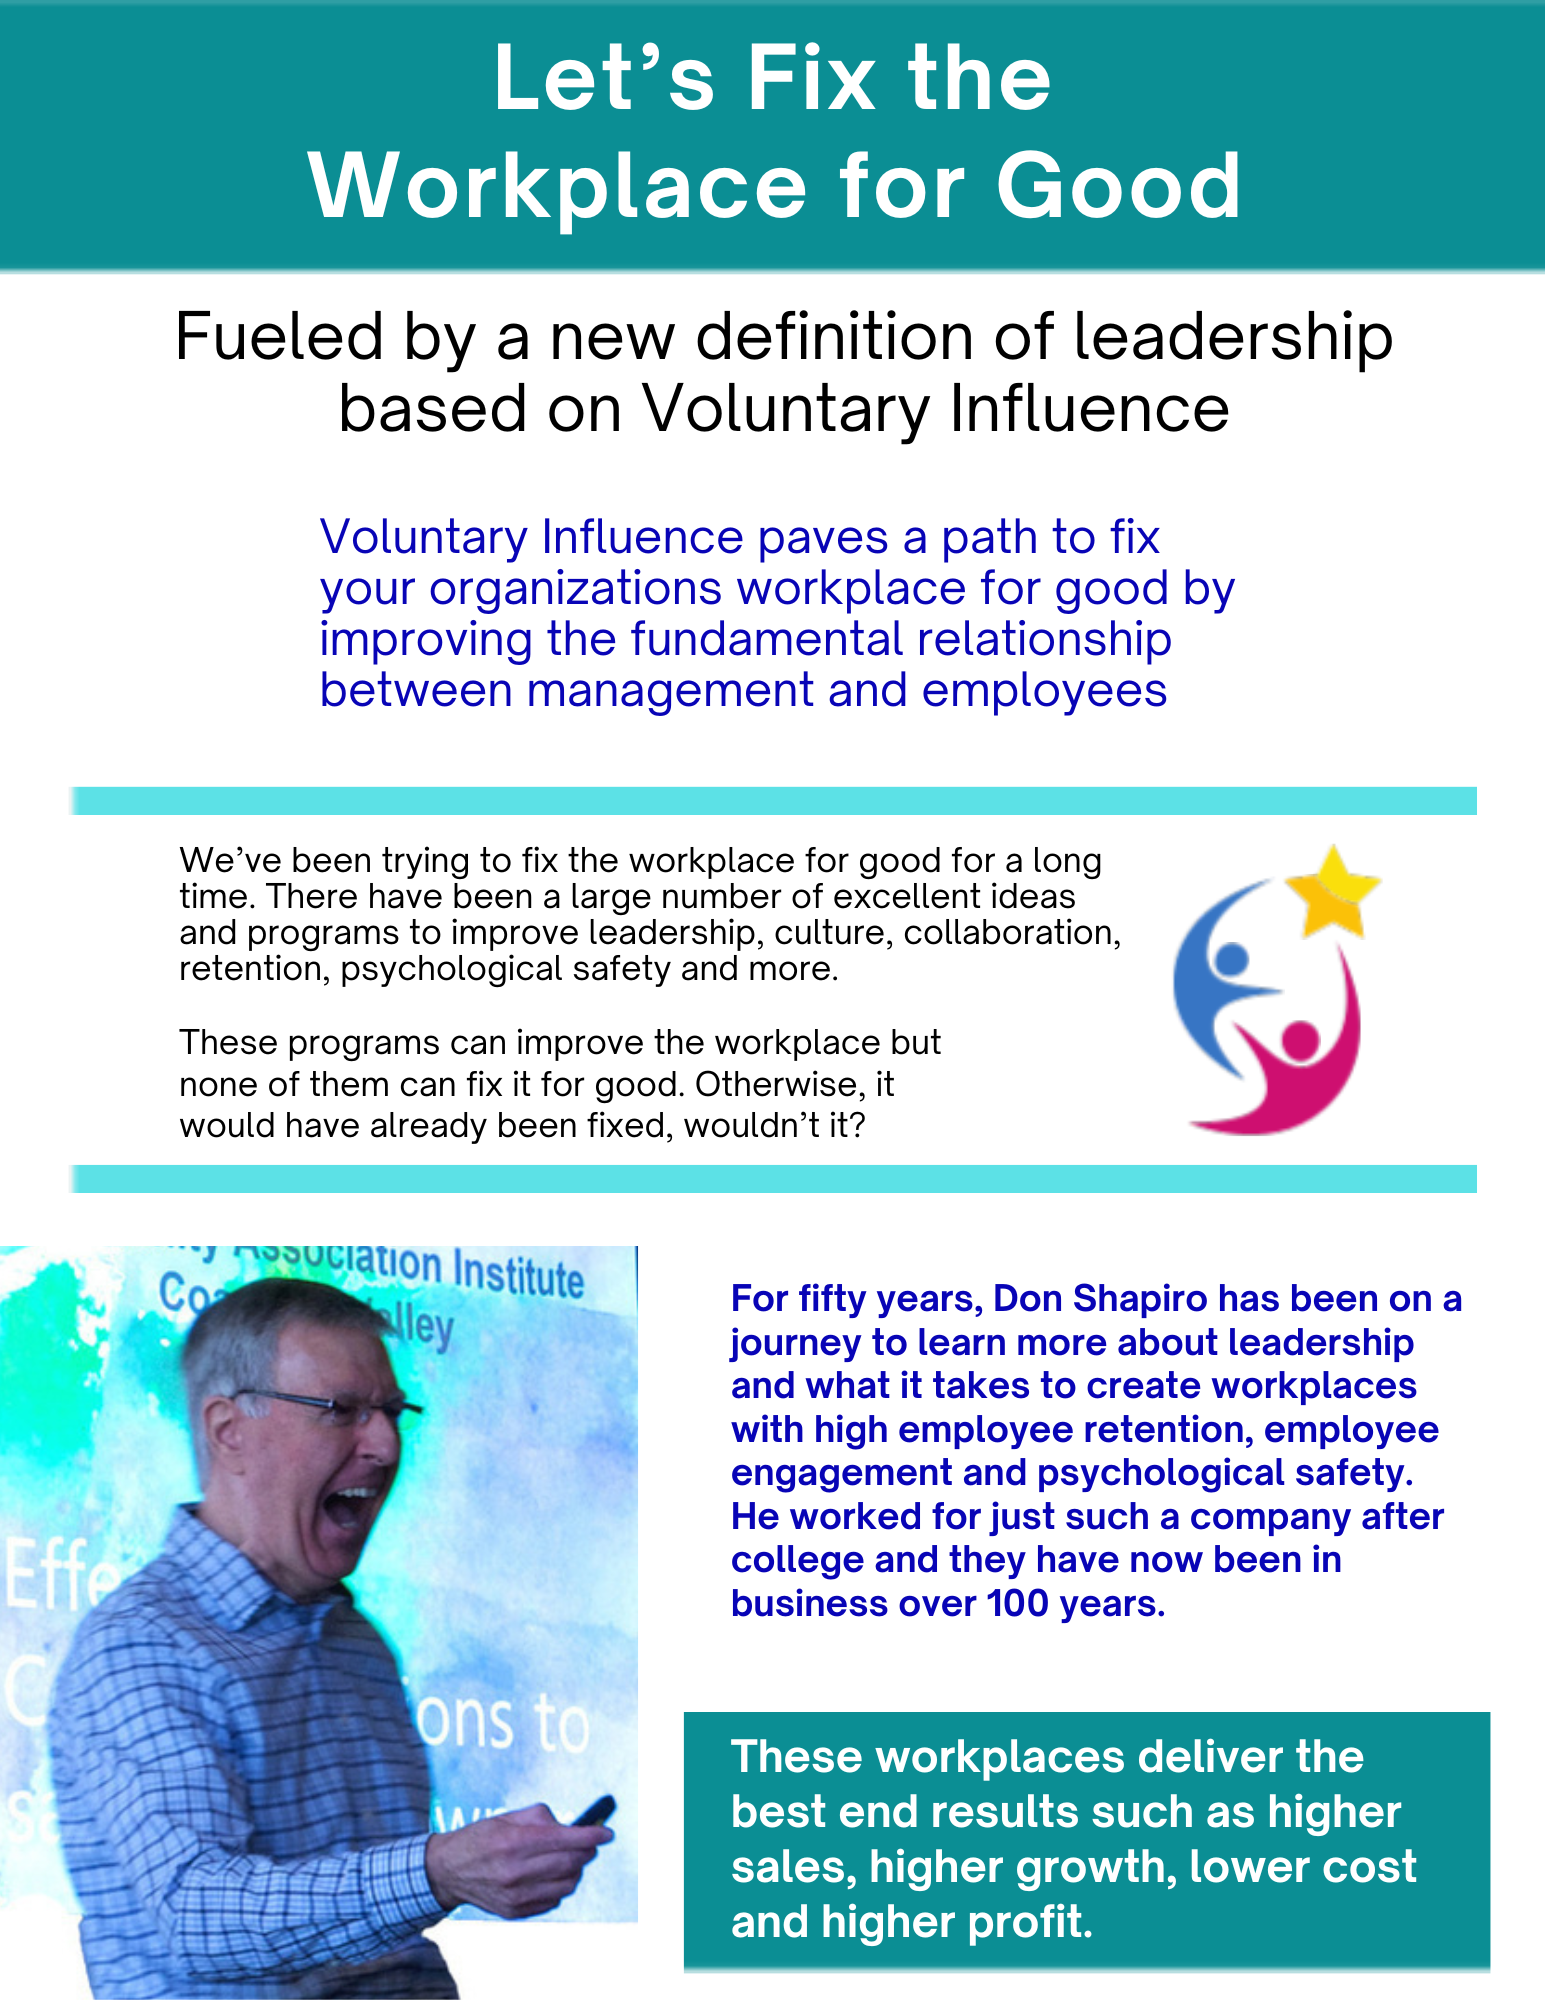 How to fix the workplace for good through a culture of Voluntary Influence based on a new definition of leadership